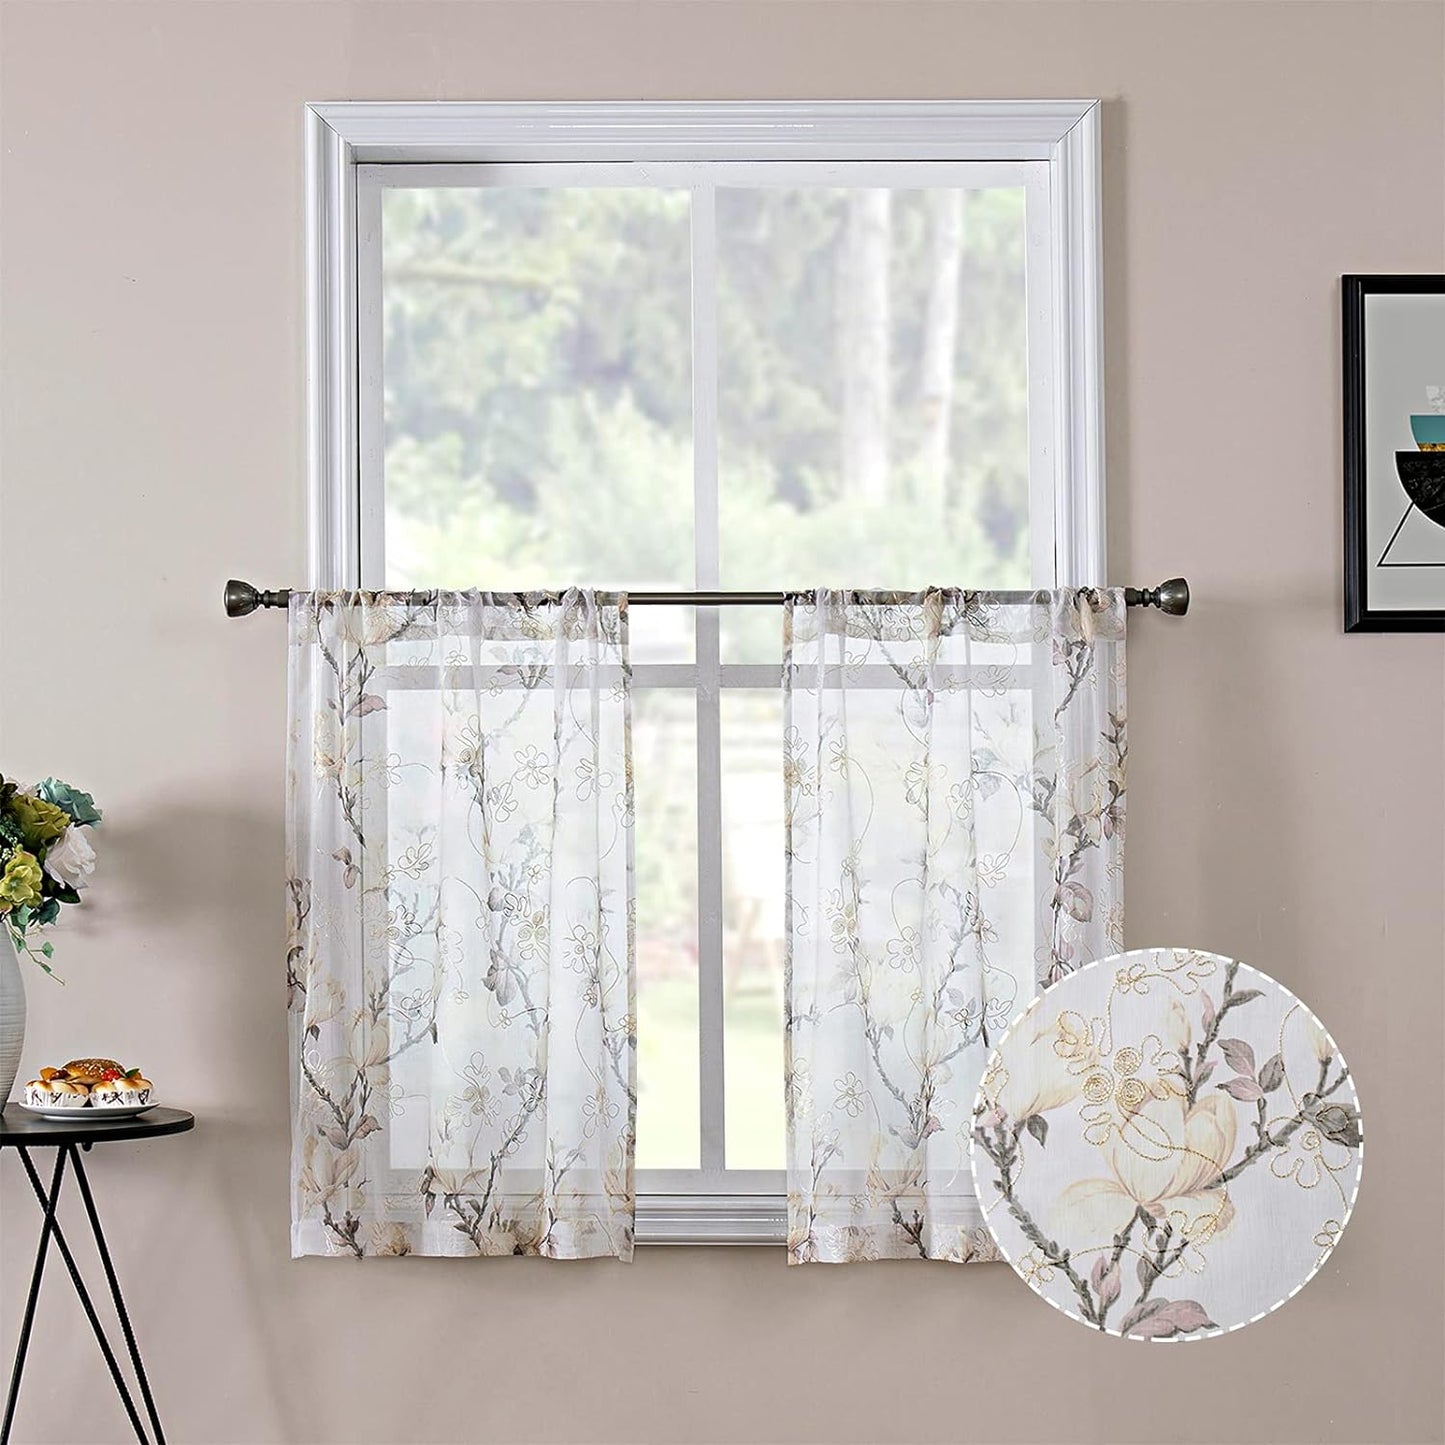 Tollpiz Floral White Sheer Curtain Flower Print Vine Embroidery Bedroom Curtains Rod Pocket Voile Window Curtain for Living Room, 54 X 84 Inches Long, Set of 2 Panels  Tollpiz Tex White 30"W X 24"L 